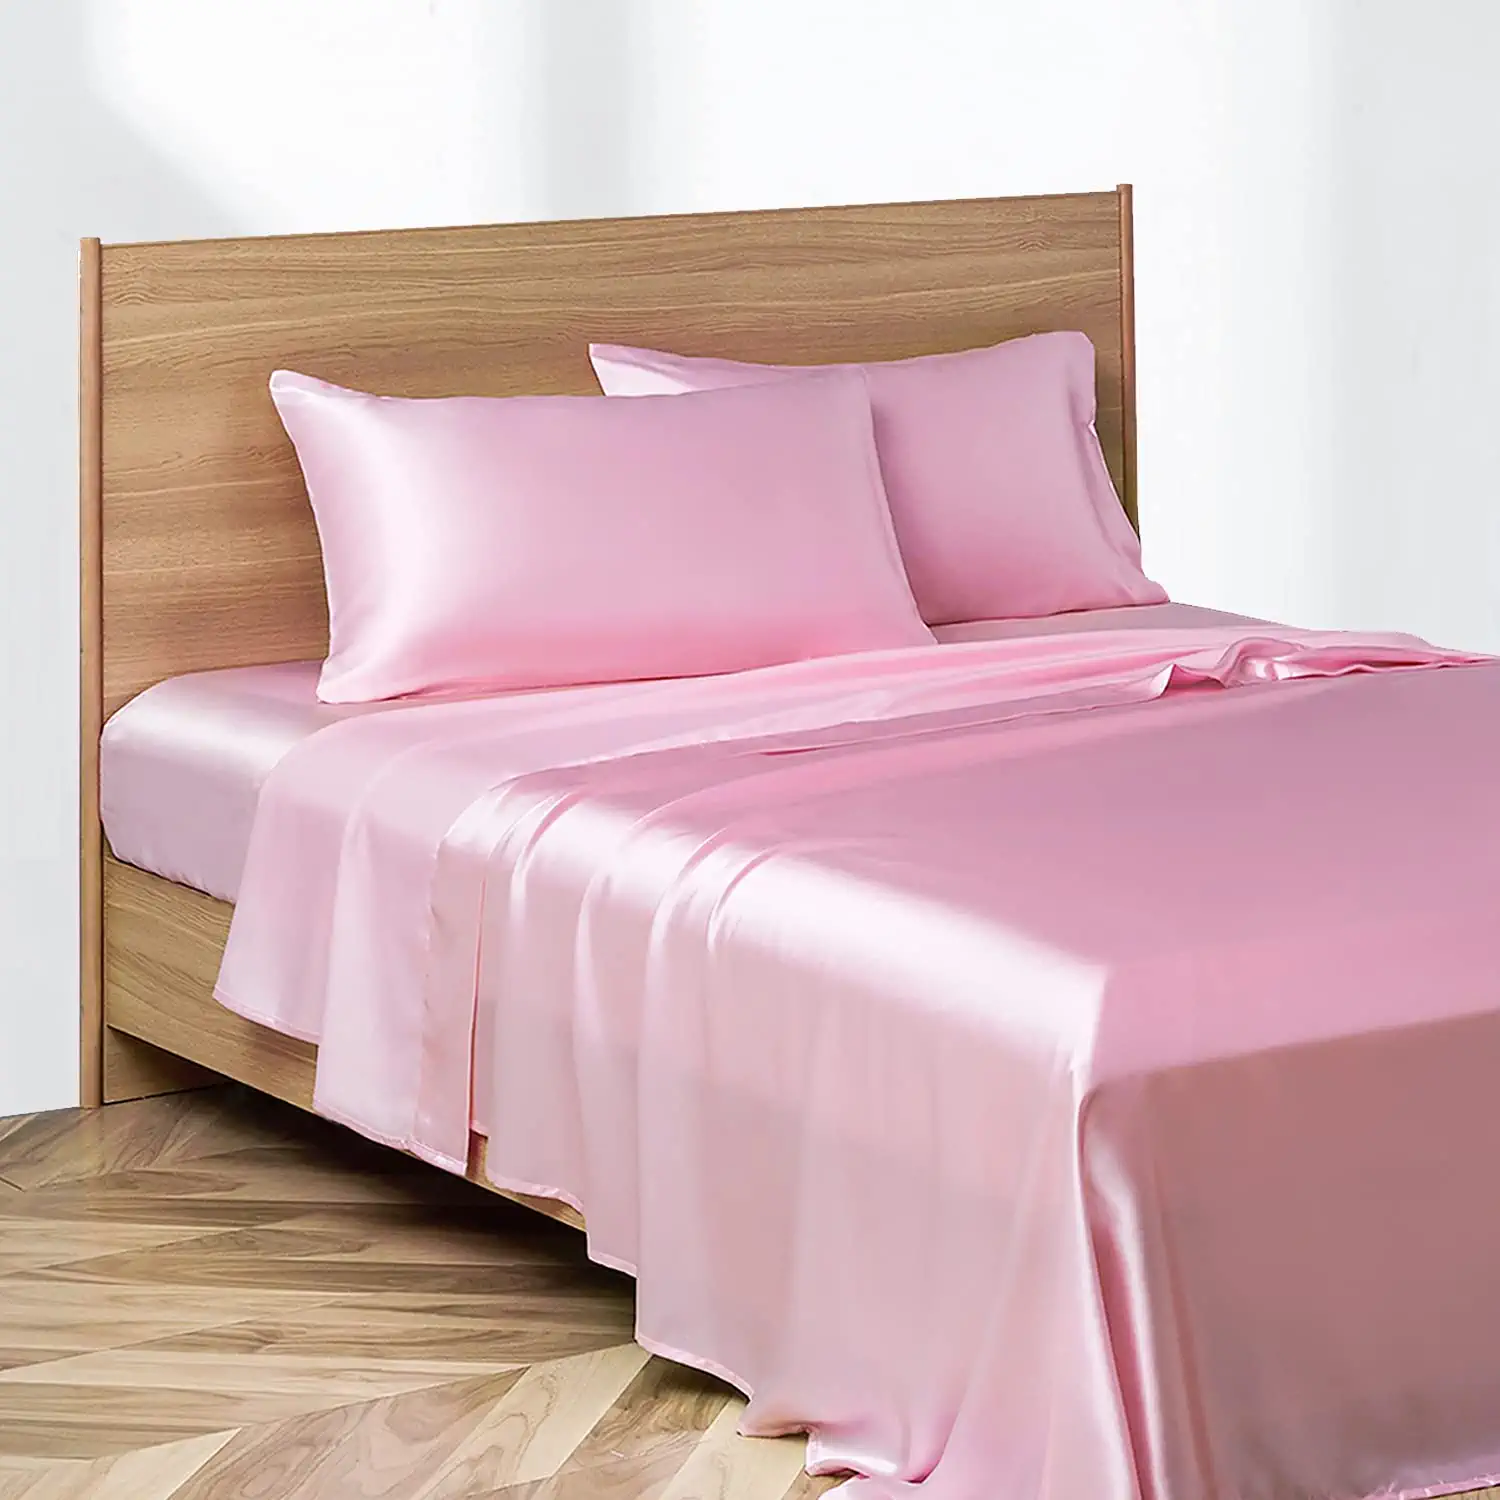 Photo 1 of Candoury Satin Sheets Bed Set 4 Pcs, King Size Silky Bedding Set, Soft and Durable Pillowcase, Flat Sheet and Fitted Sheet, Hotel Luxury Bed Sheets Set(King, Pink)
